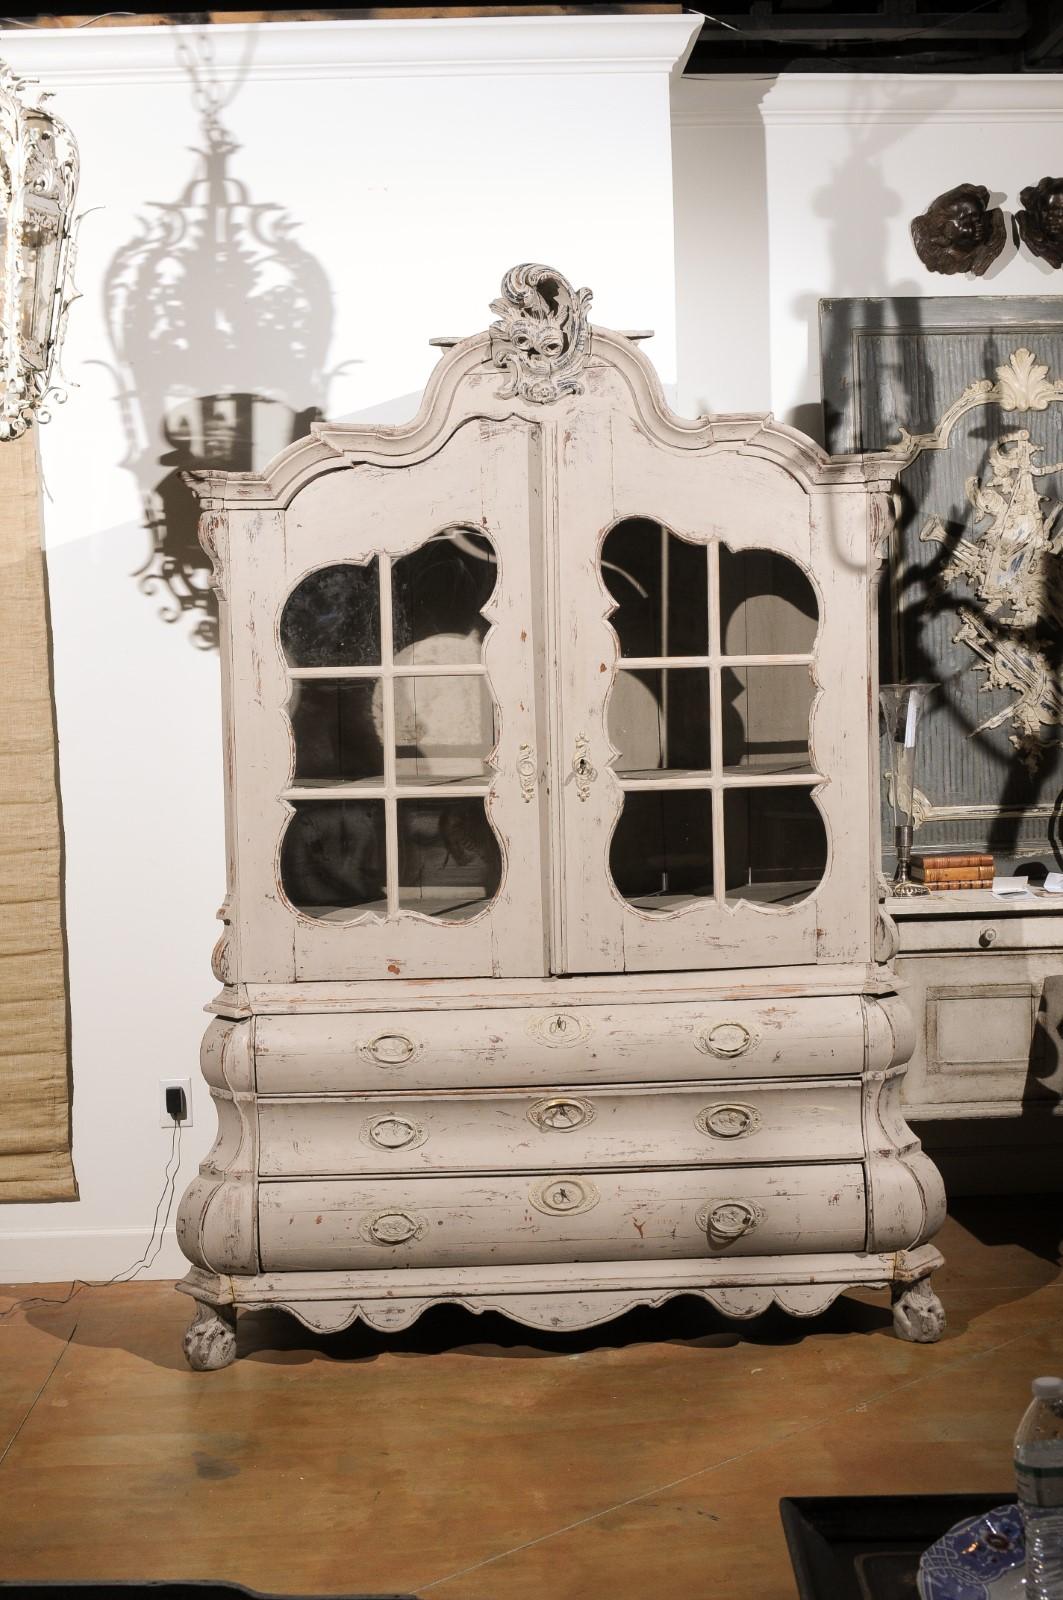 A Dutch Rococo Revival painted cabinet from the mid 19th century with two glass doors over three drawers and original hardware. This painted cabinet, created in the Netherlands during the 1850s, features a bonnet shaped pediment, exquisitely adorned